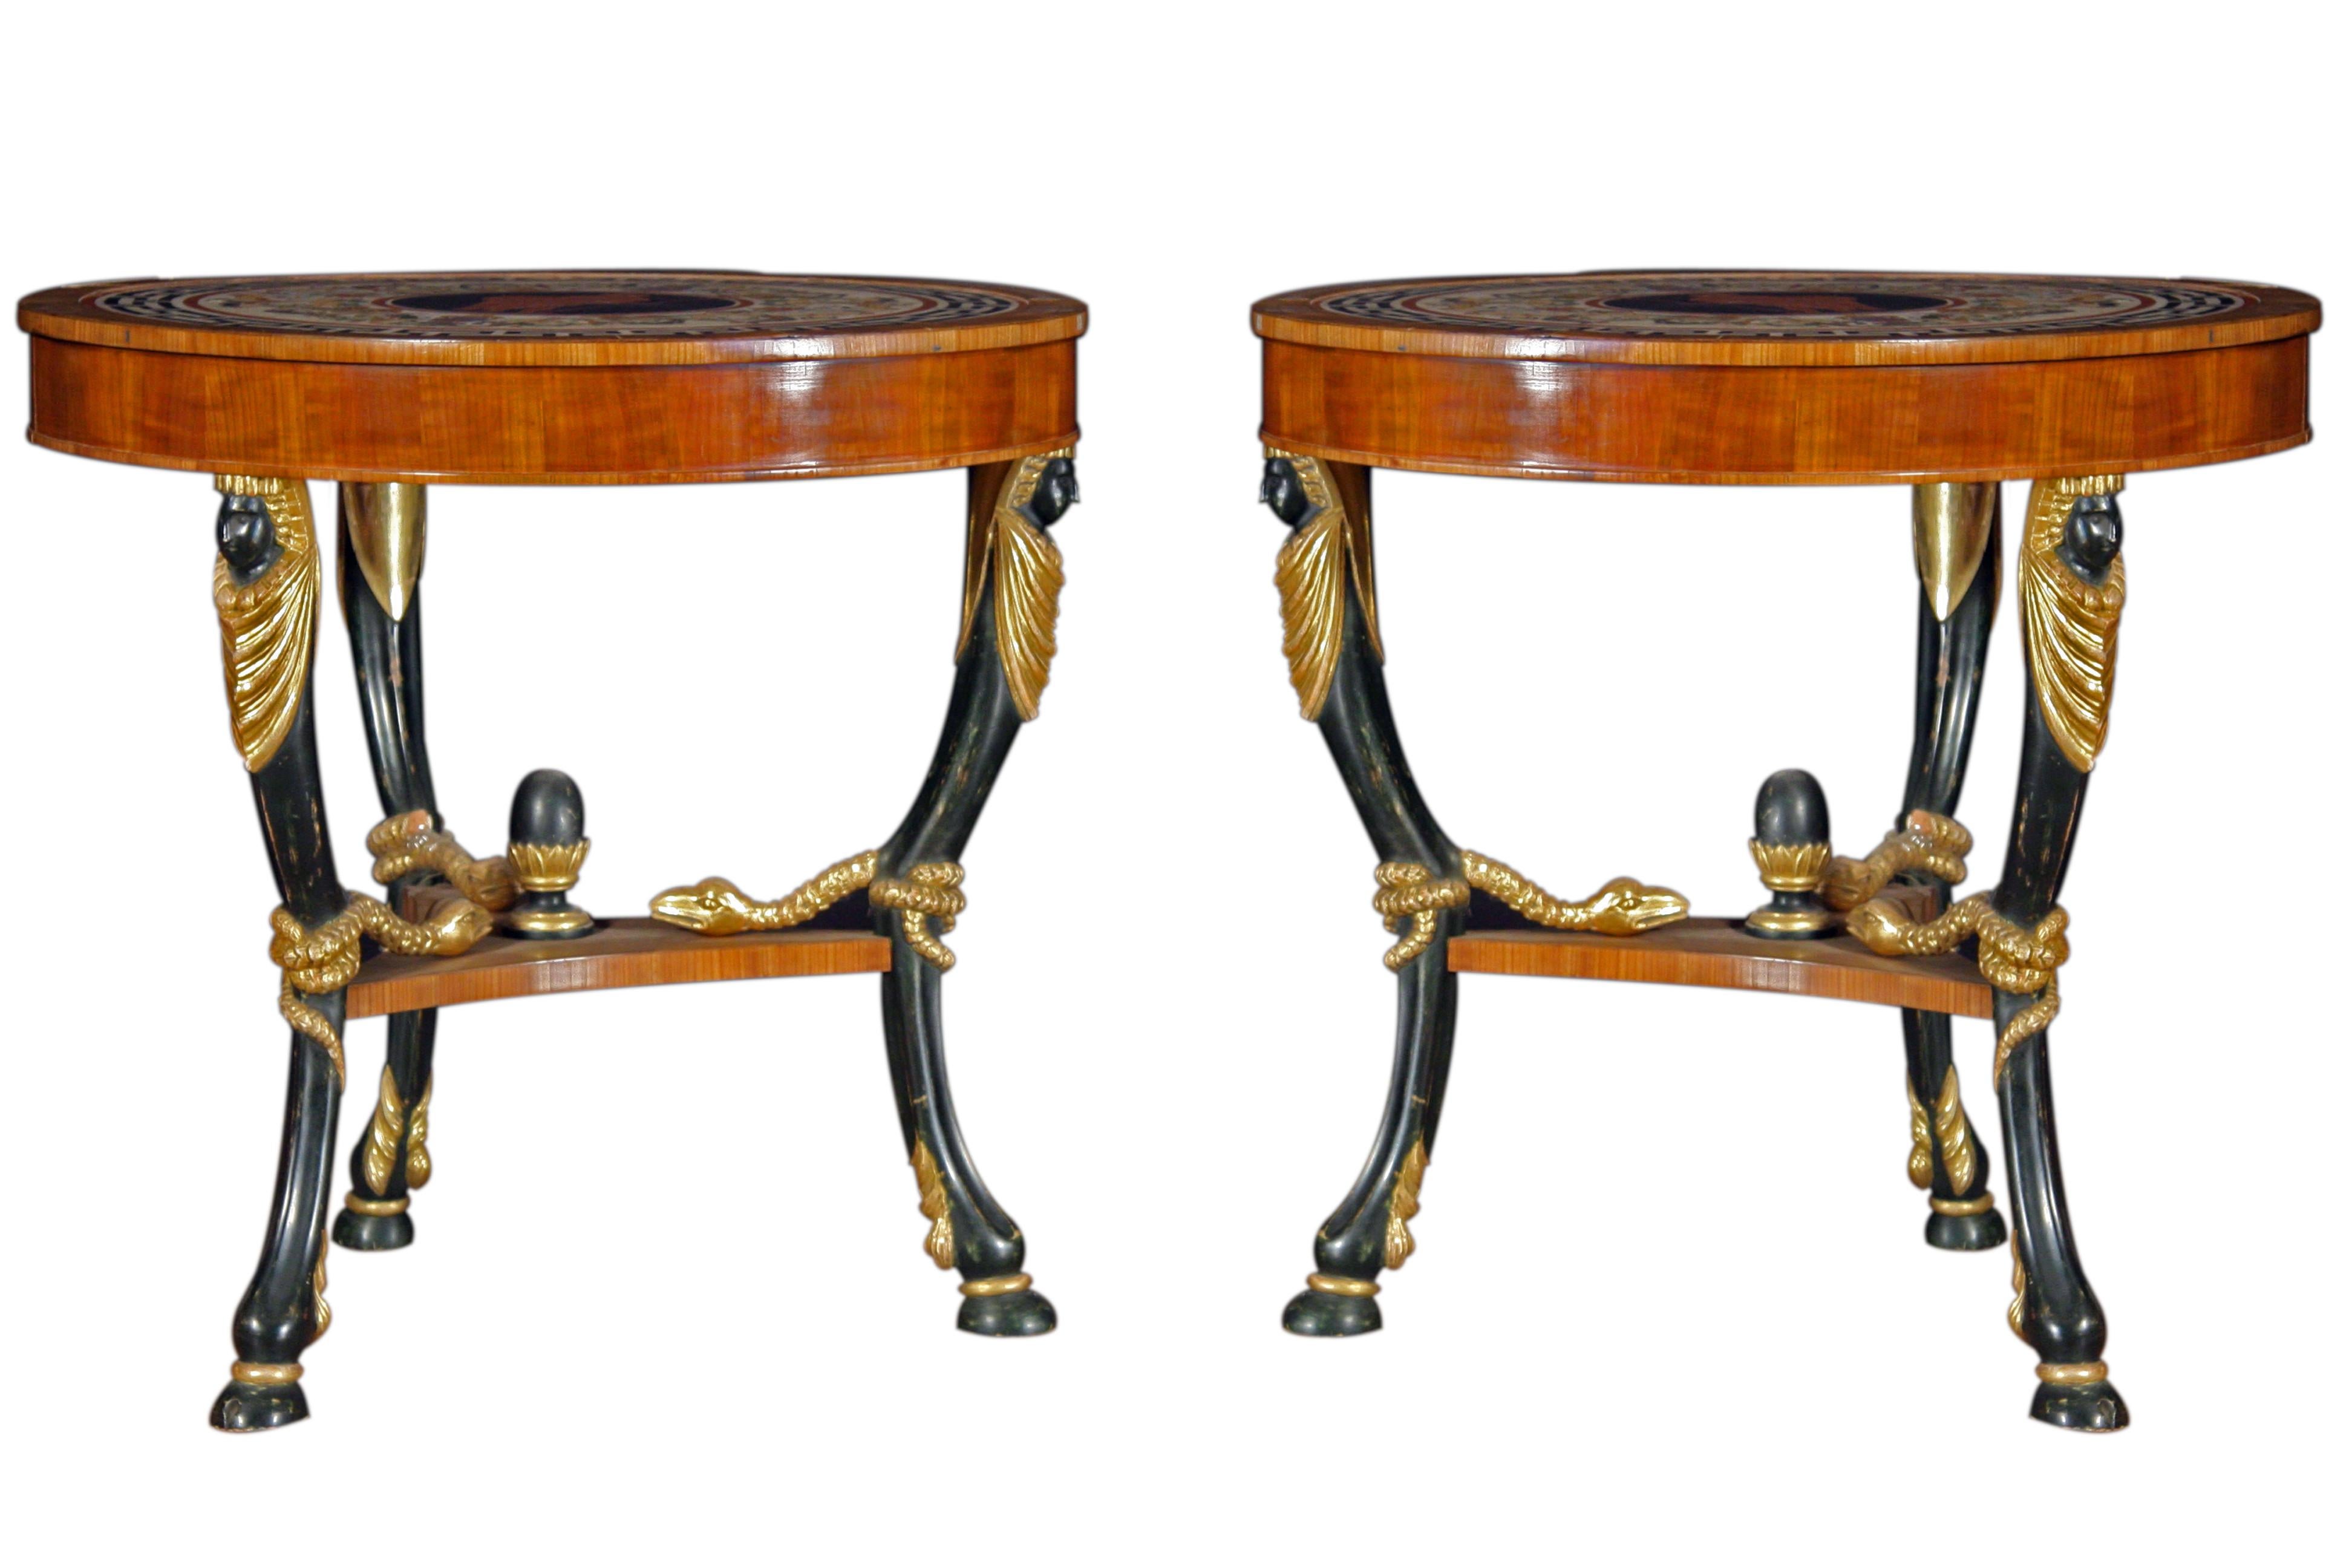 Italian Pair of Tables in Empire Style with Ebonized Inlaid and Gilded 